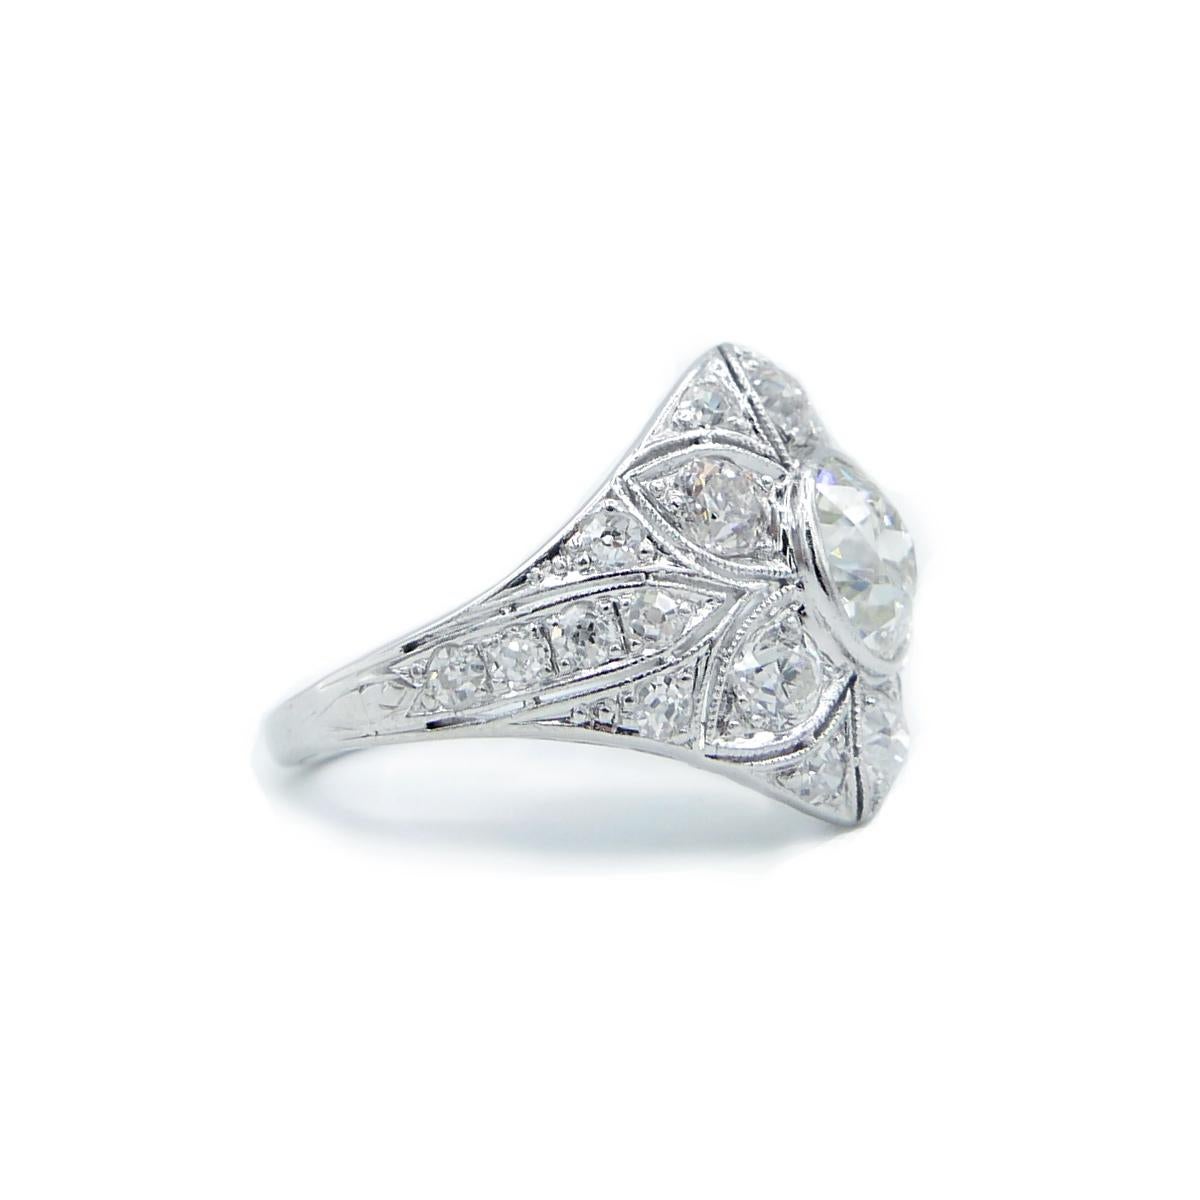 Edwardian Platinum and Old European Cut Diamond Flower Ring featuring Old European cut diamonds  Center stone is 1.50ct total diamonds are estimated at 2.8cts
F,G color, VS Clarity
Handmade in the early 20th Century by an extremely skilled